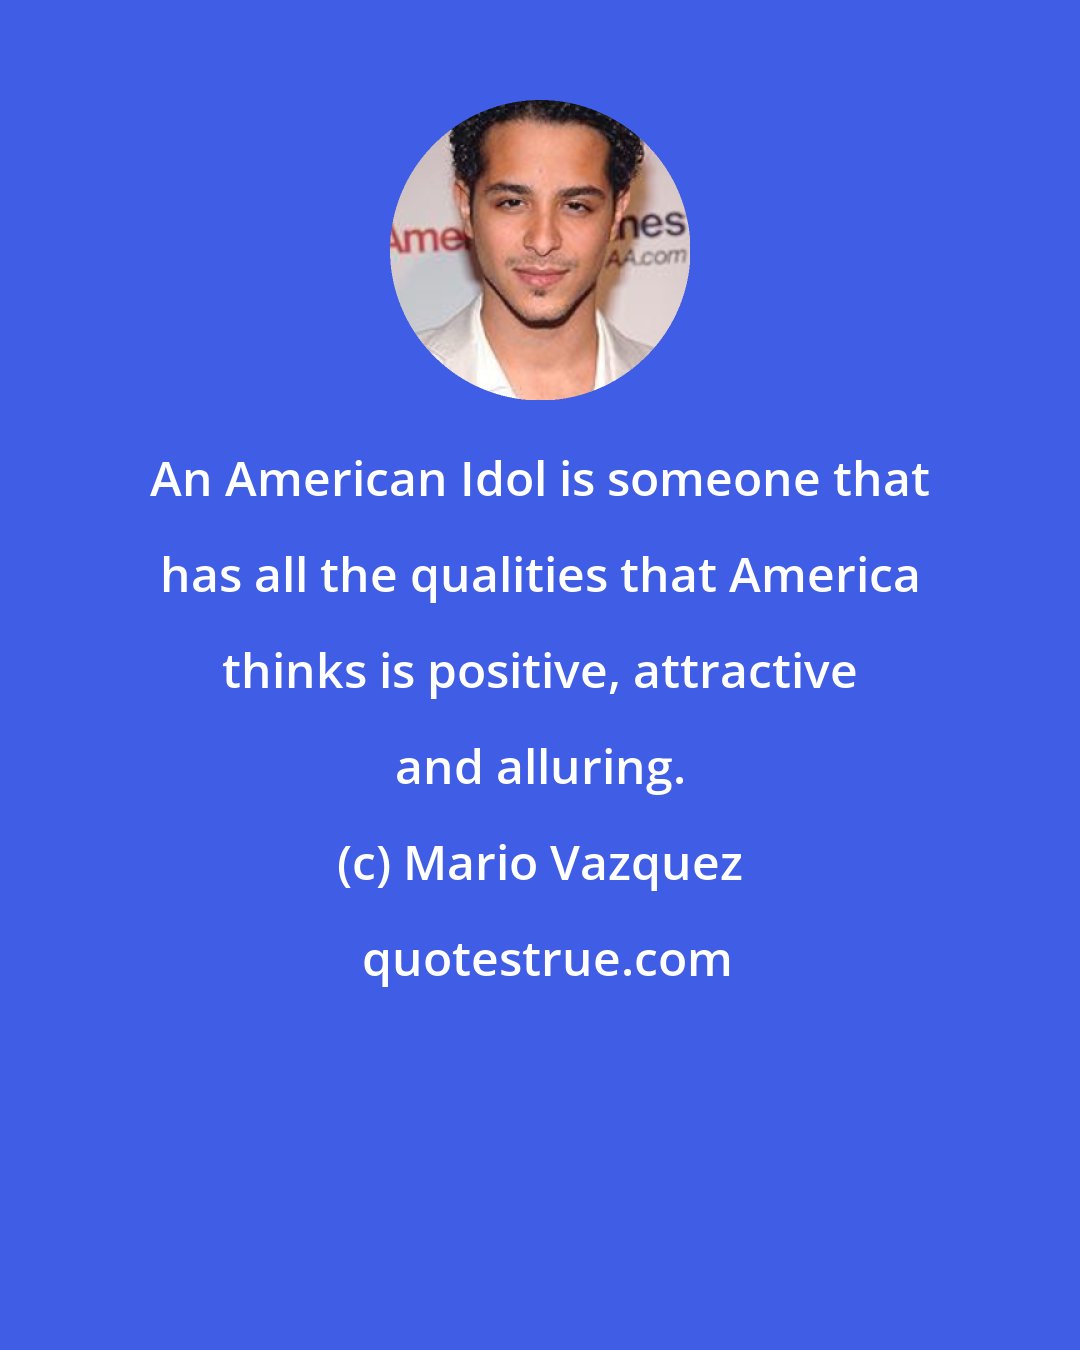 Mario Vazquez: An American Idol is someone that has all the qualities that America thinks is positive, attractive and alluring.